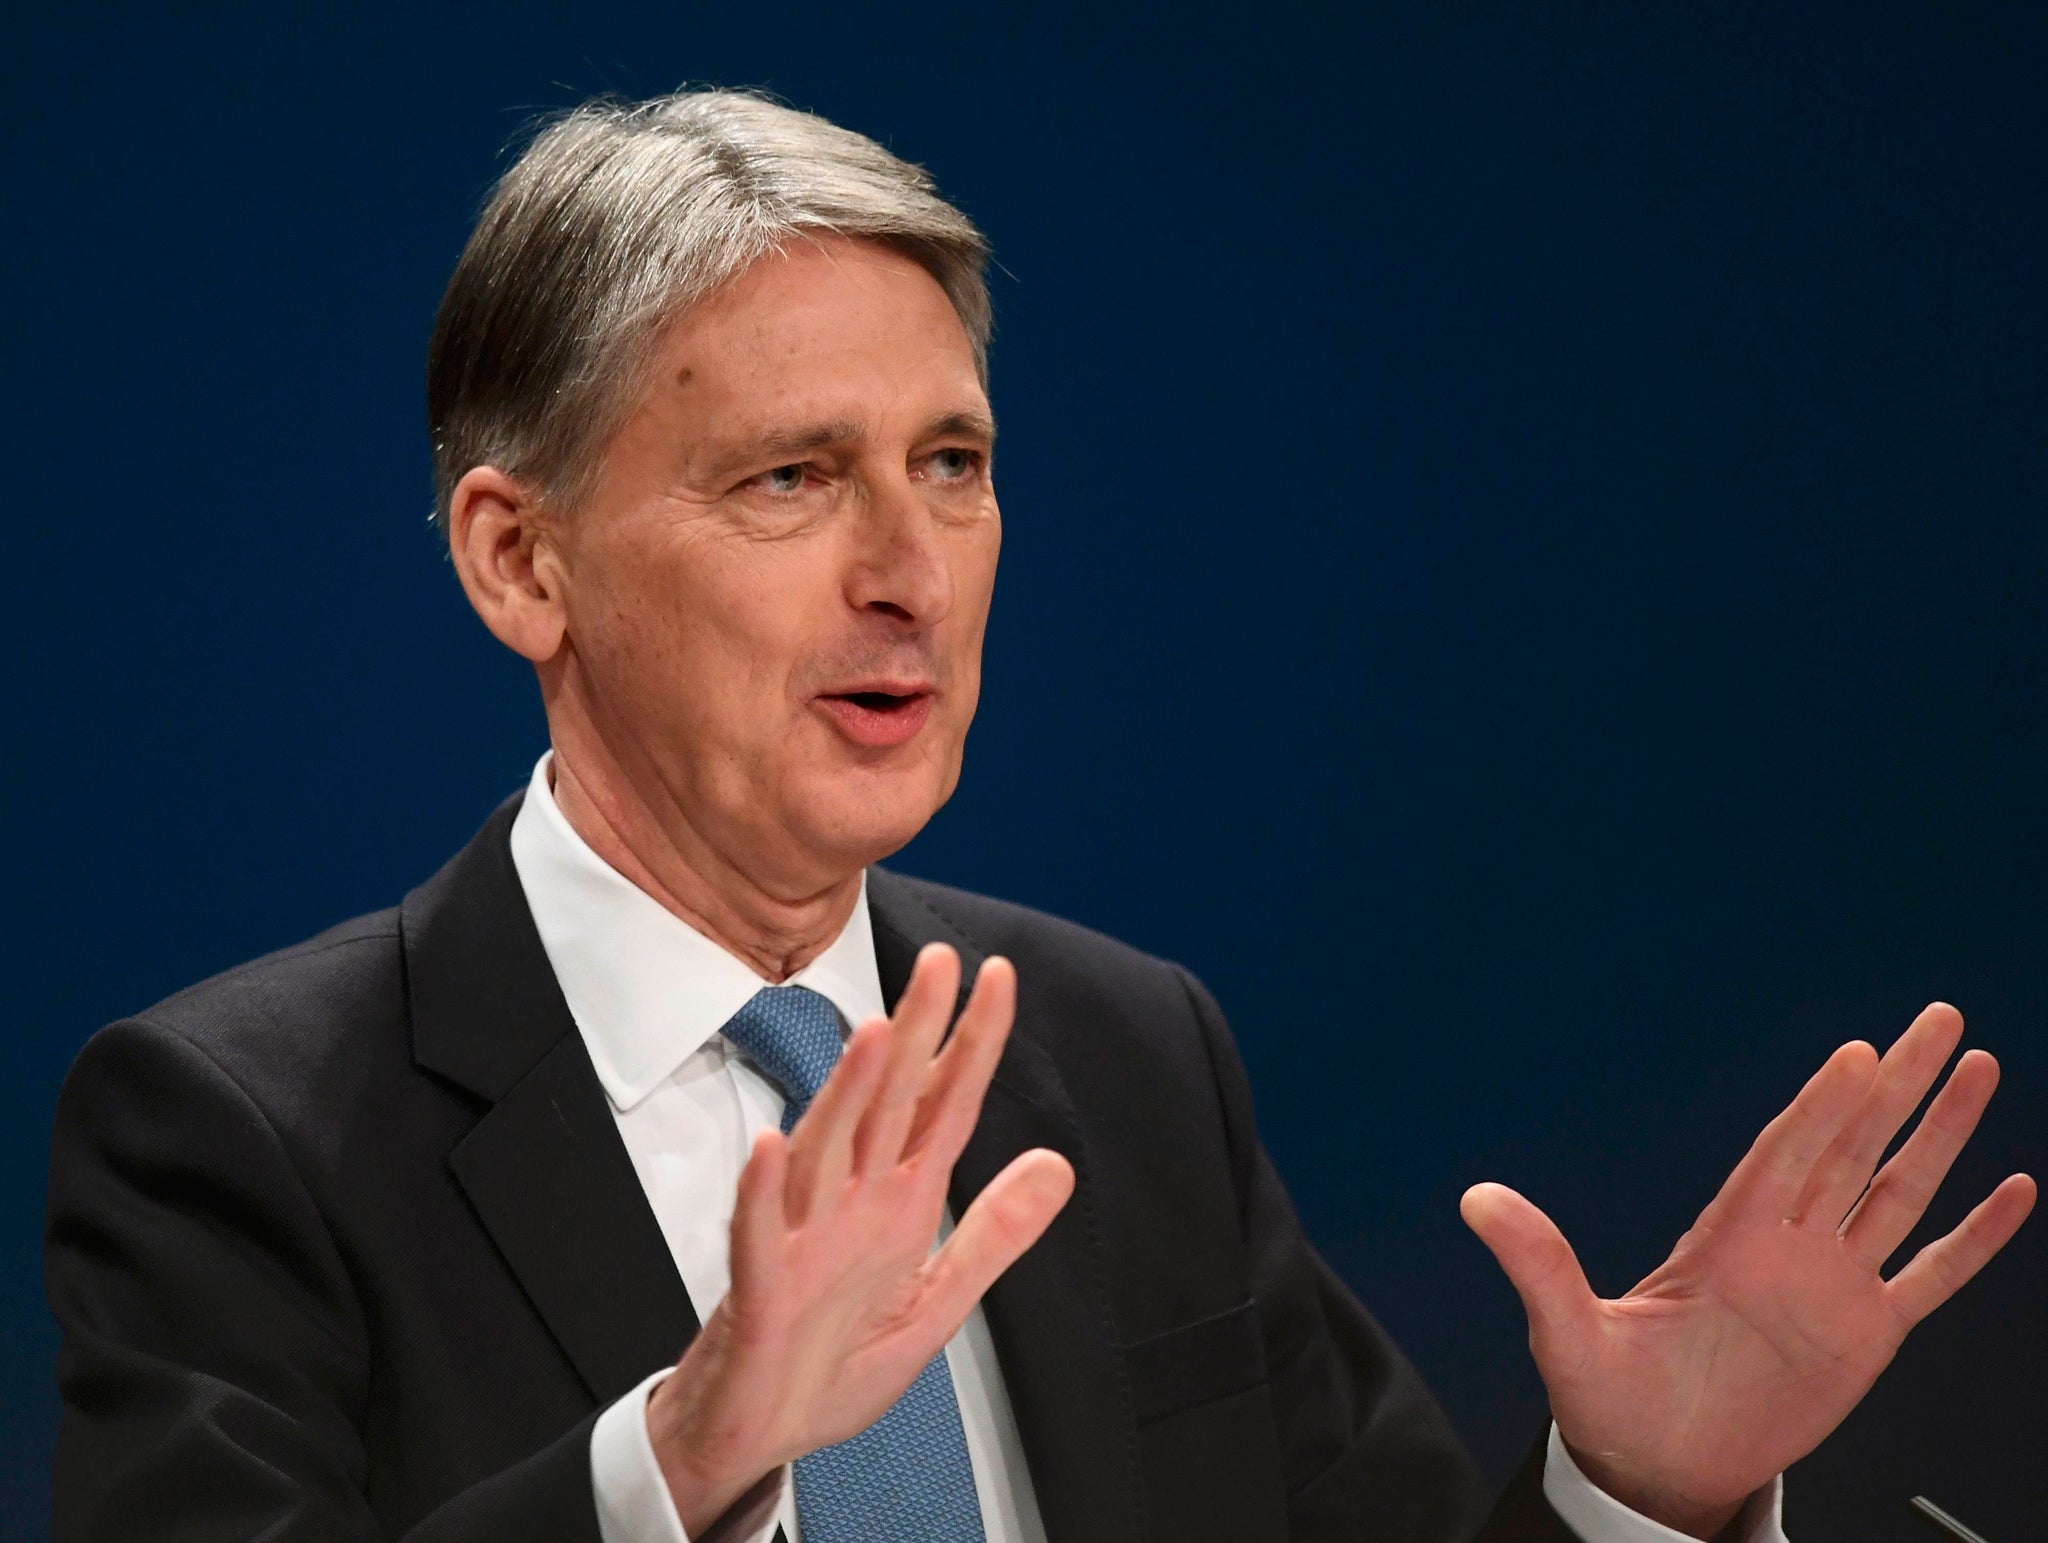 Chancellor of the Exchequer Philip Hammond has inherited an economy with disappointing tax receipts